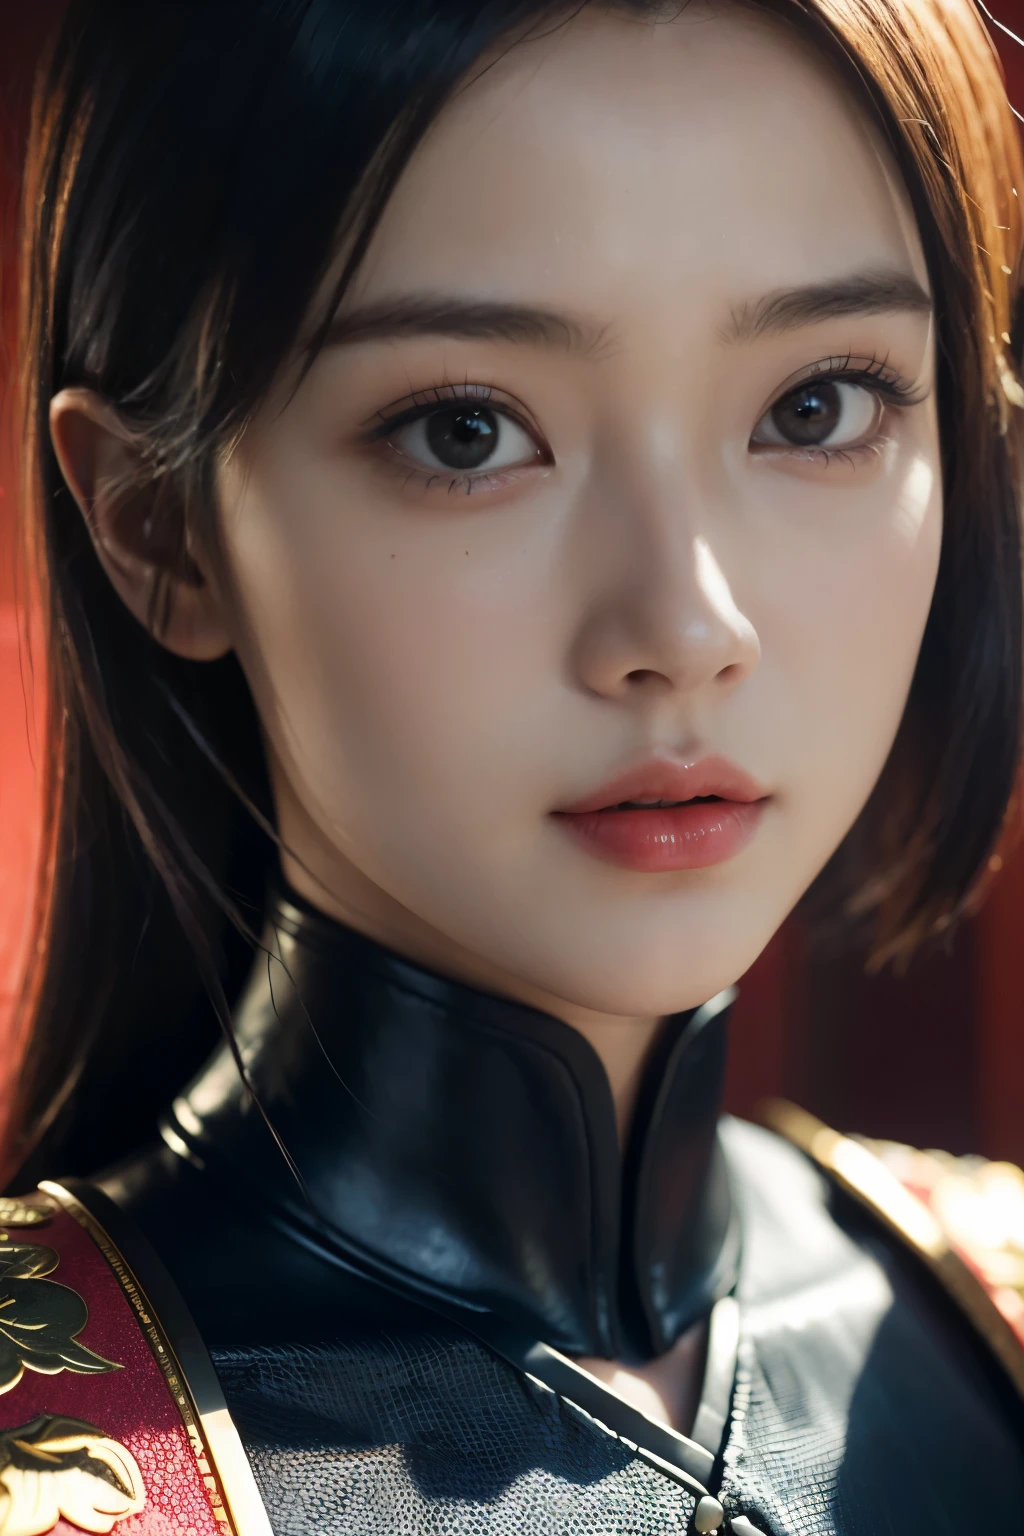 Game art，The best picture quality，Highest resolution，8K，((A bust photograph))，((Portrait))，((Head close-up:1.5))，(Rule of thirds)，Unreal Engine 5 rendering works， (The Girl of the Future)，(Female Warrior)， 22-year-old girl，(Female hackers)，(Ancient Oriental hairstyle)，((The pupils of the red eyes:1.3))，(A beautiful eye full of detail)，(Big breasts)，(Eye shadow)，Elegant and charming，indifferent，((Anger))，(Future style silk combat suit combined with the characteristics of Chinese cheongsam，Joint Armor，There are exquisite Chinese patterns on the clothes，A flash of jewellery)，Cyberpunk Characters，Future Style， Photo poses，City background，Movie lights，Ray tracing，Game CG，((3D Unreal Engine))，oc rendering reflection pattern